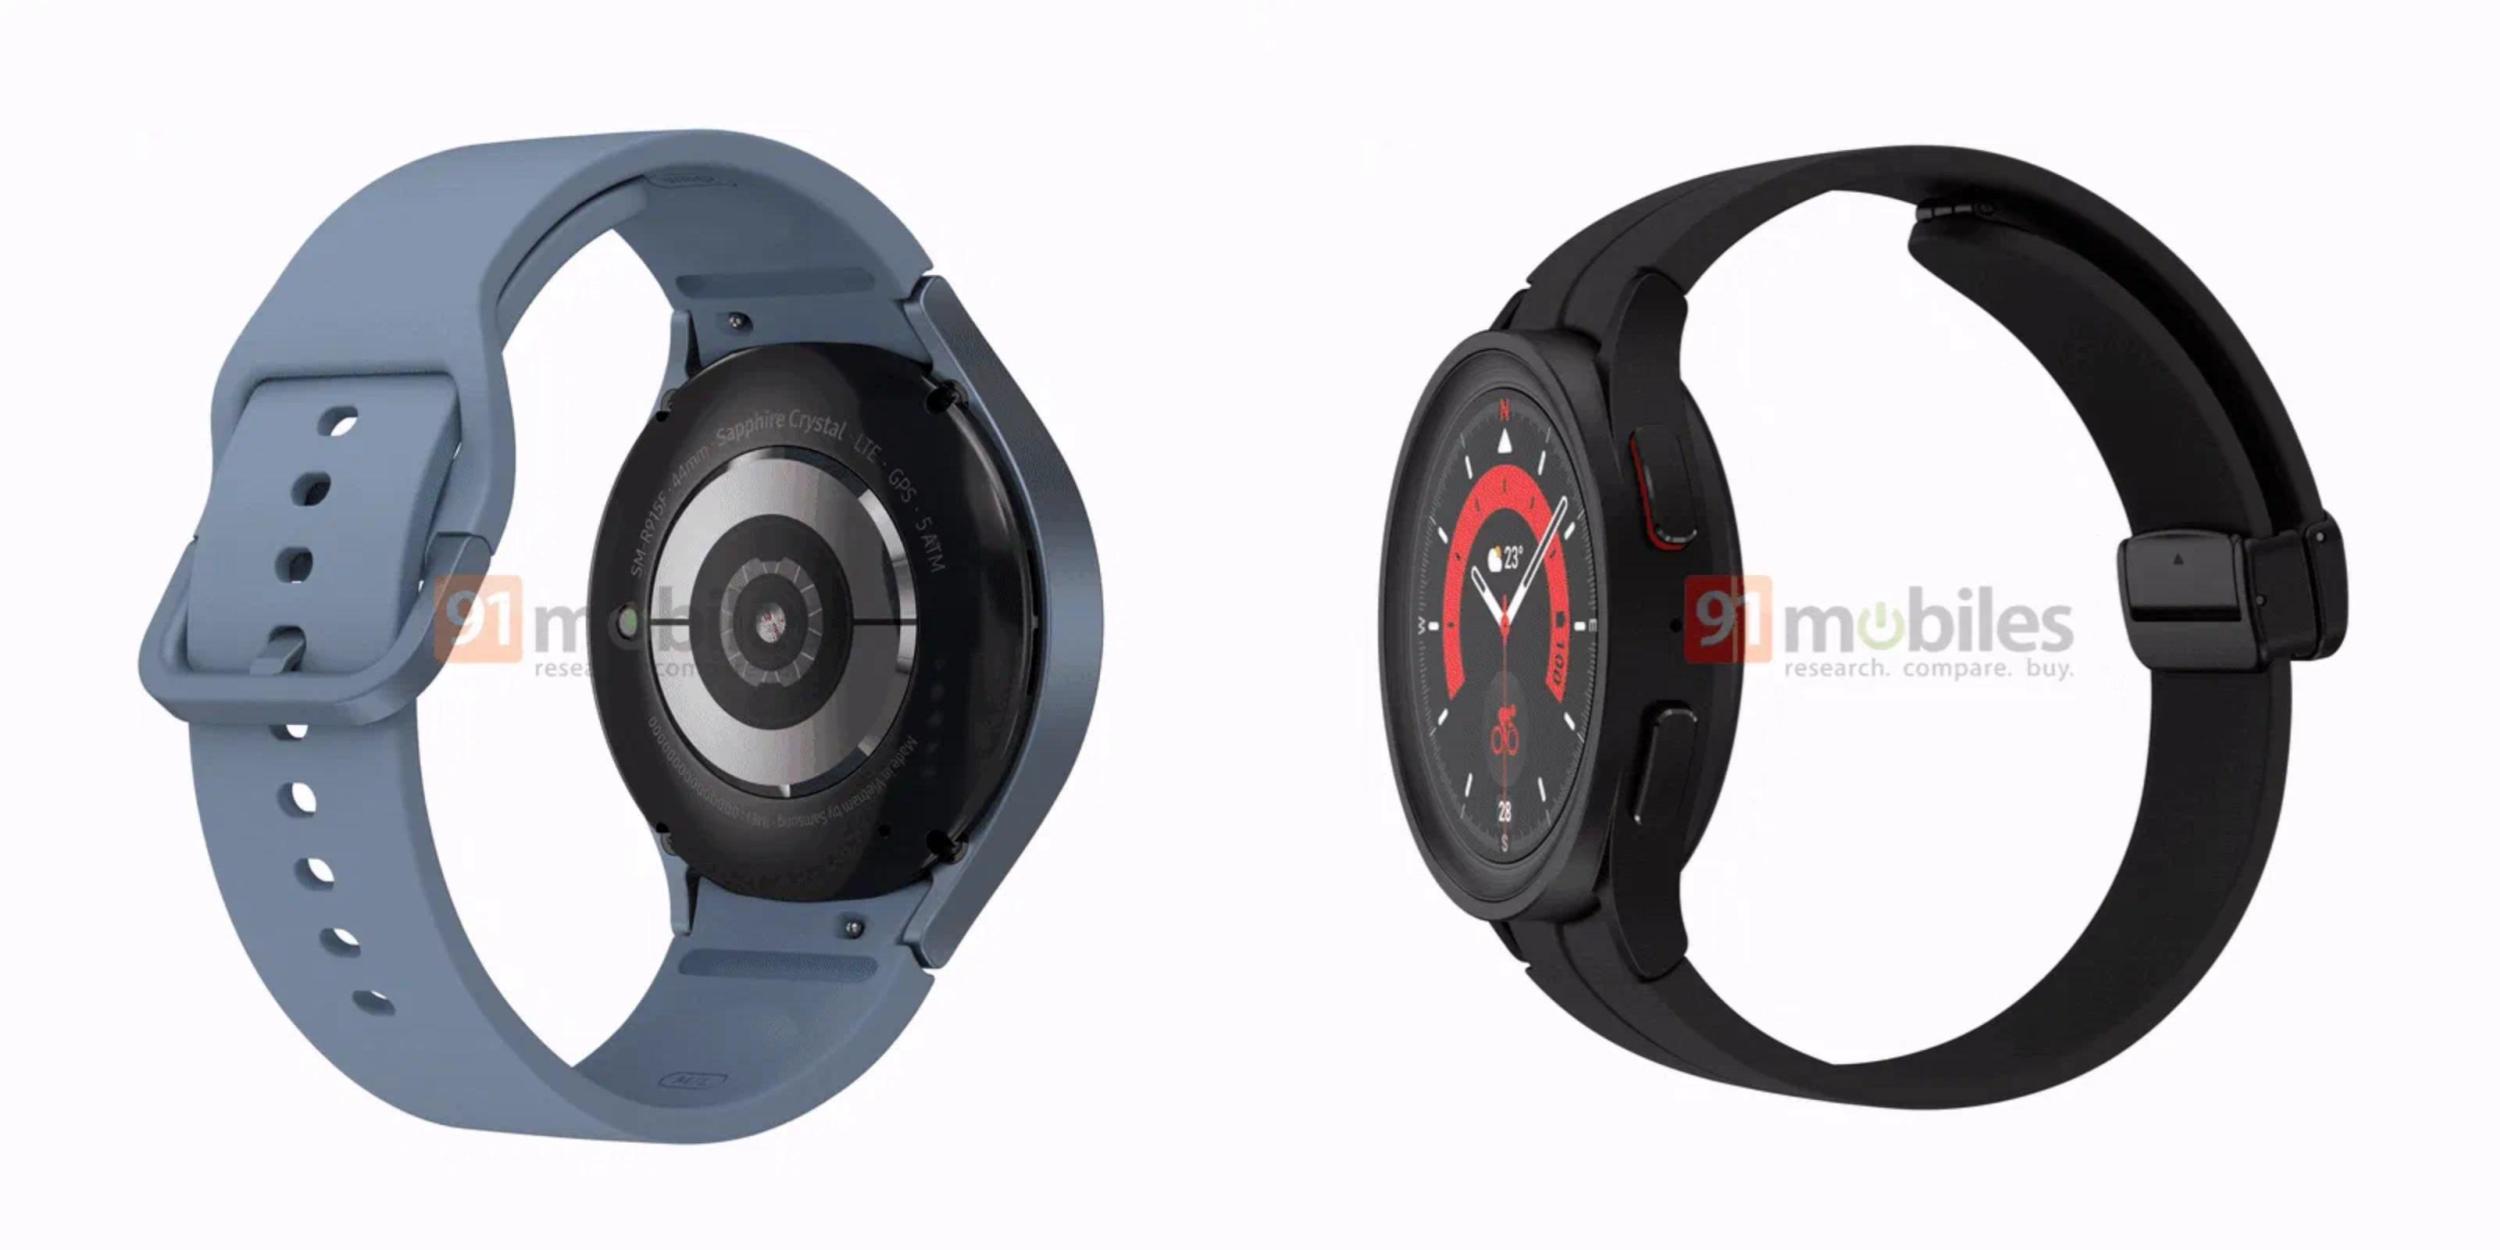 Samsung Galaxy Watch 5: Price, Release Date, Specs, and News